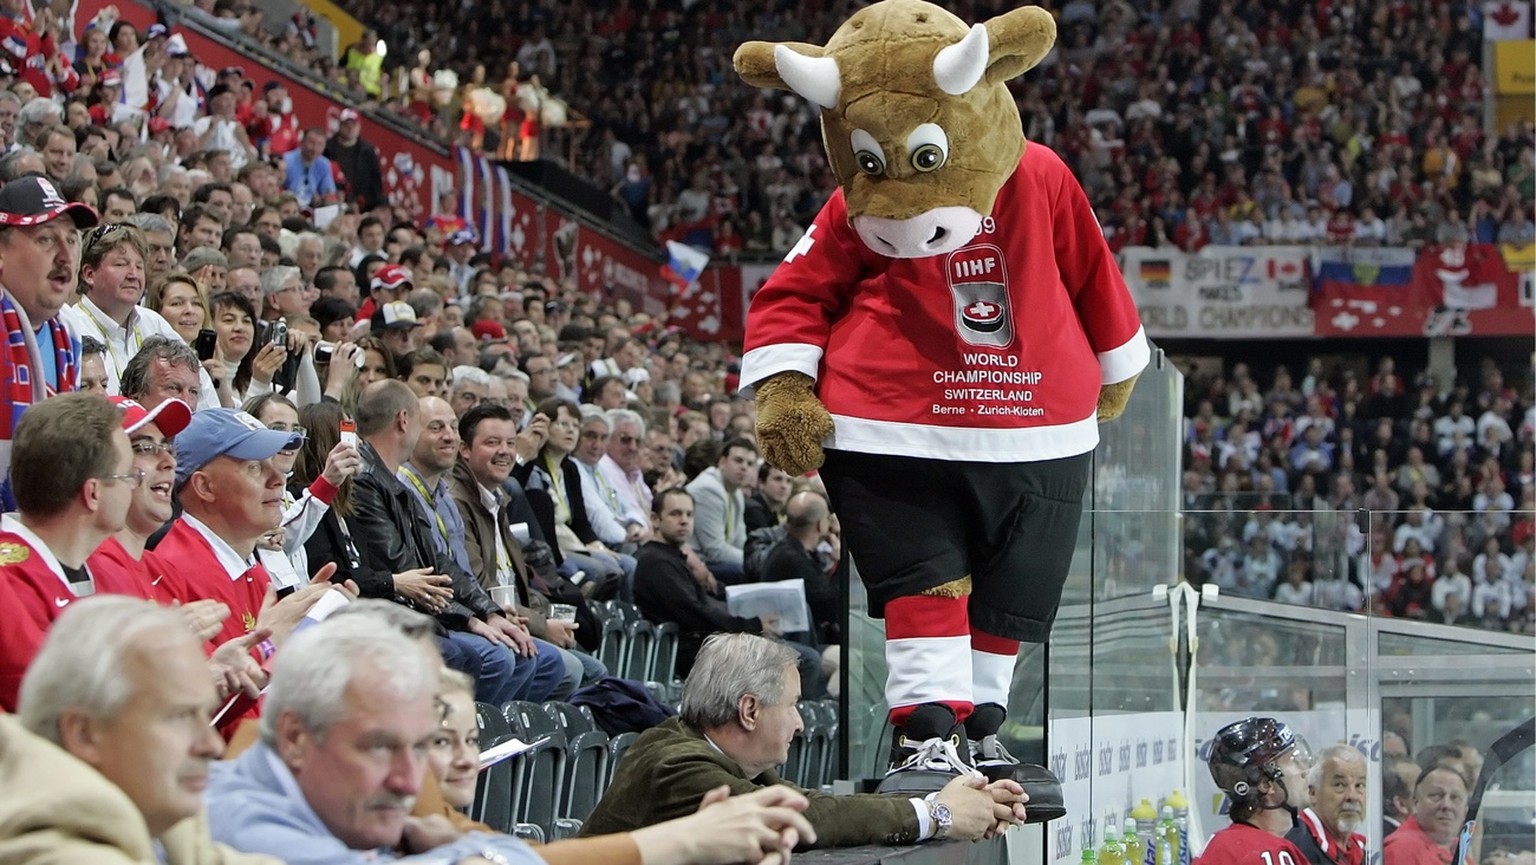 Cooly, the mascot of this championships, during the Gold Medal Game between Russia and Canada at the IIHF 2009 World Championship at the Postfinance-Arena in Berne, Switzerland, on Sunday May 10, 2009 ...